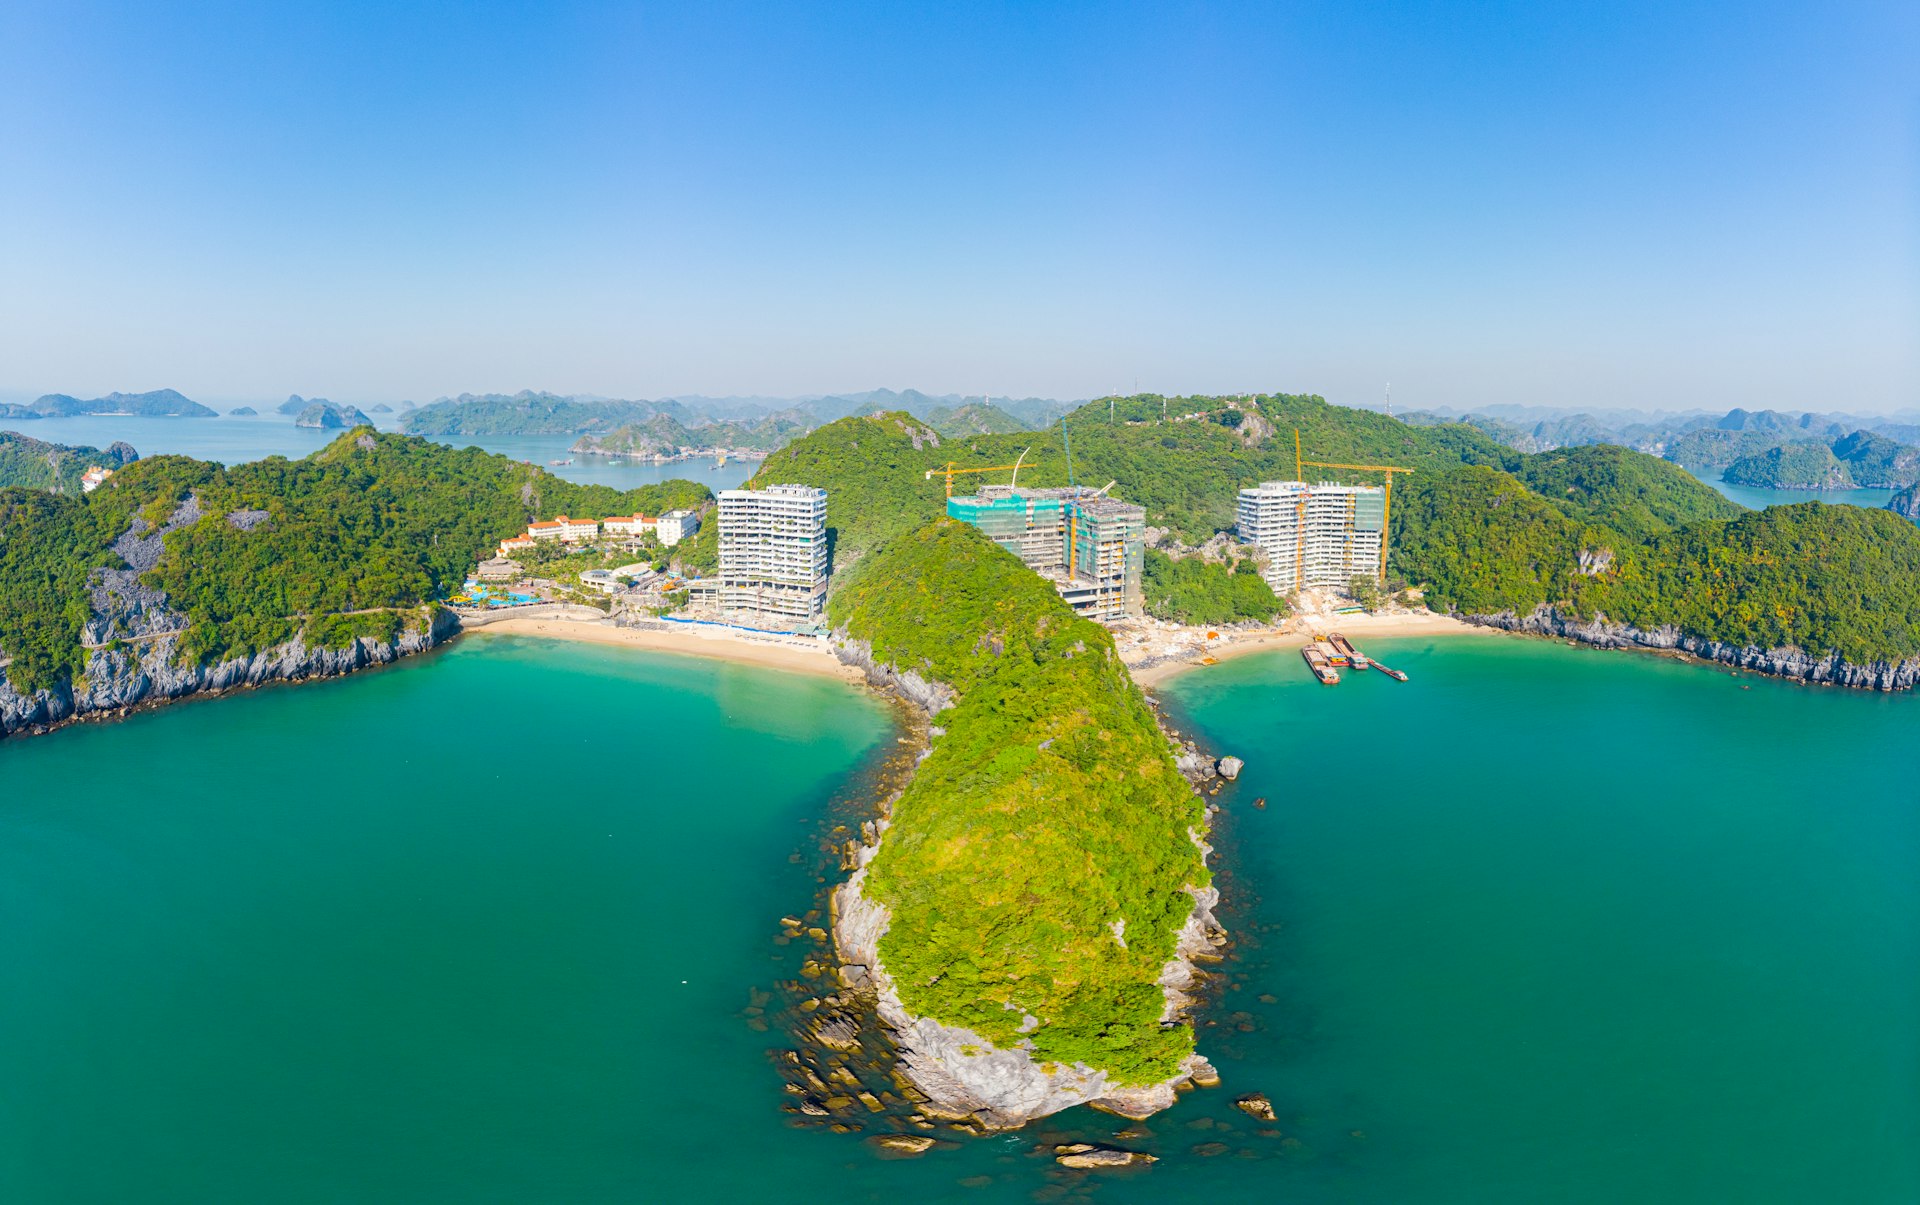 An aerial view of two of Cat Ba island's beaches. New building construction is being done on the beach. The water and sky are both a lovely shade of blue.